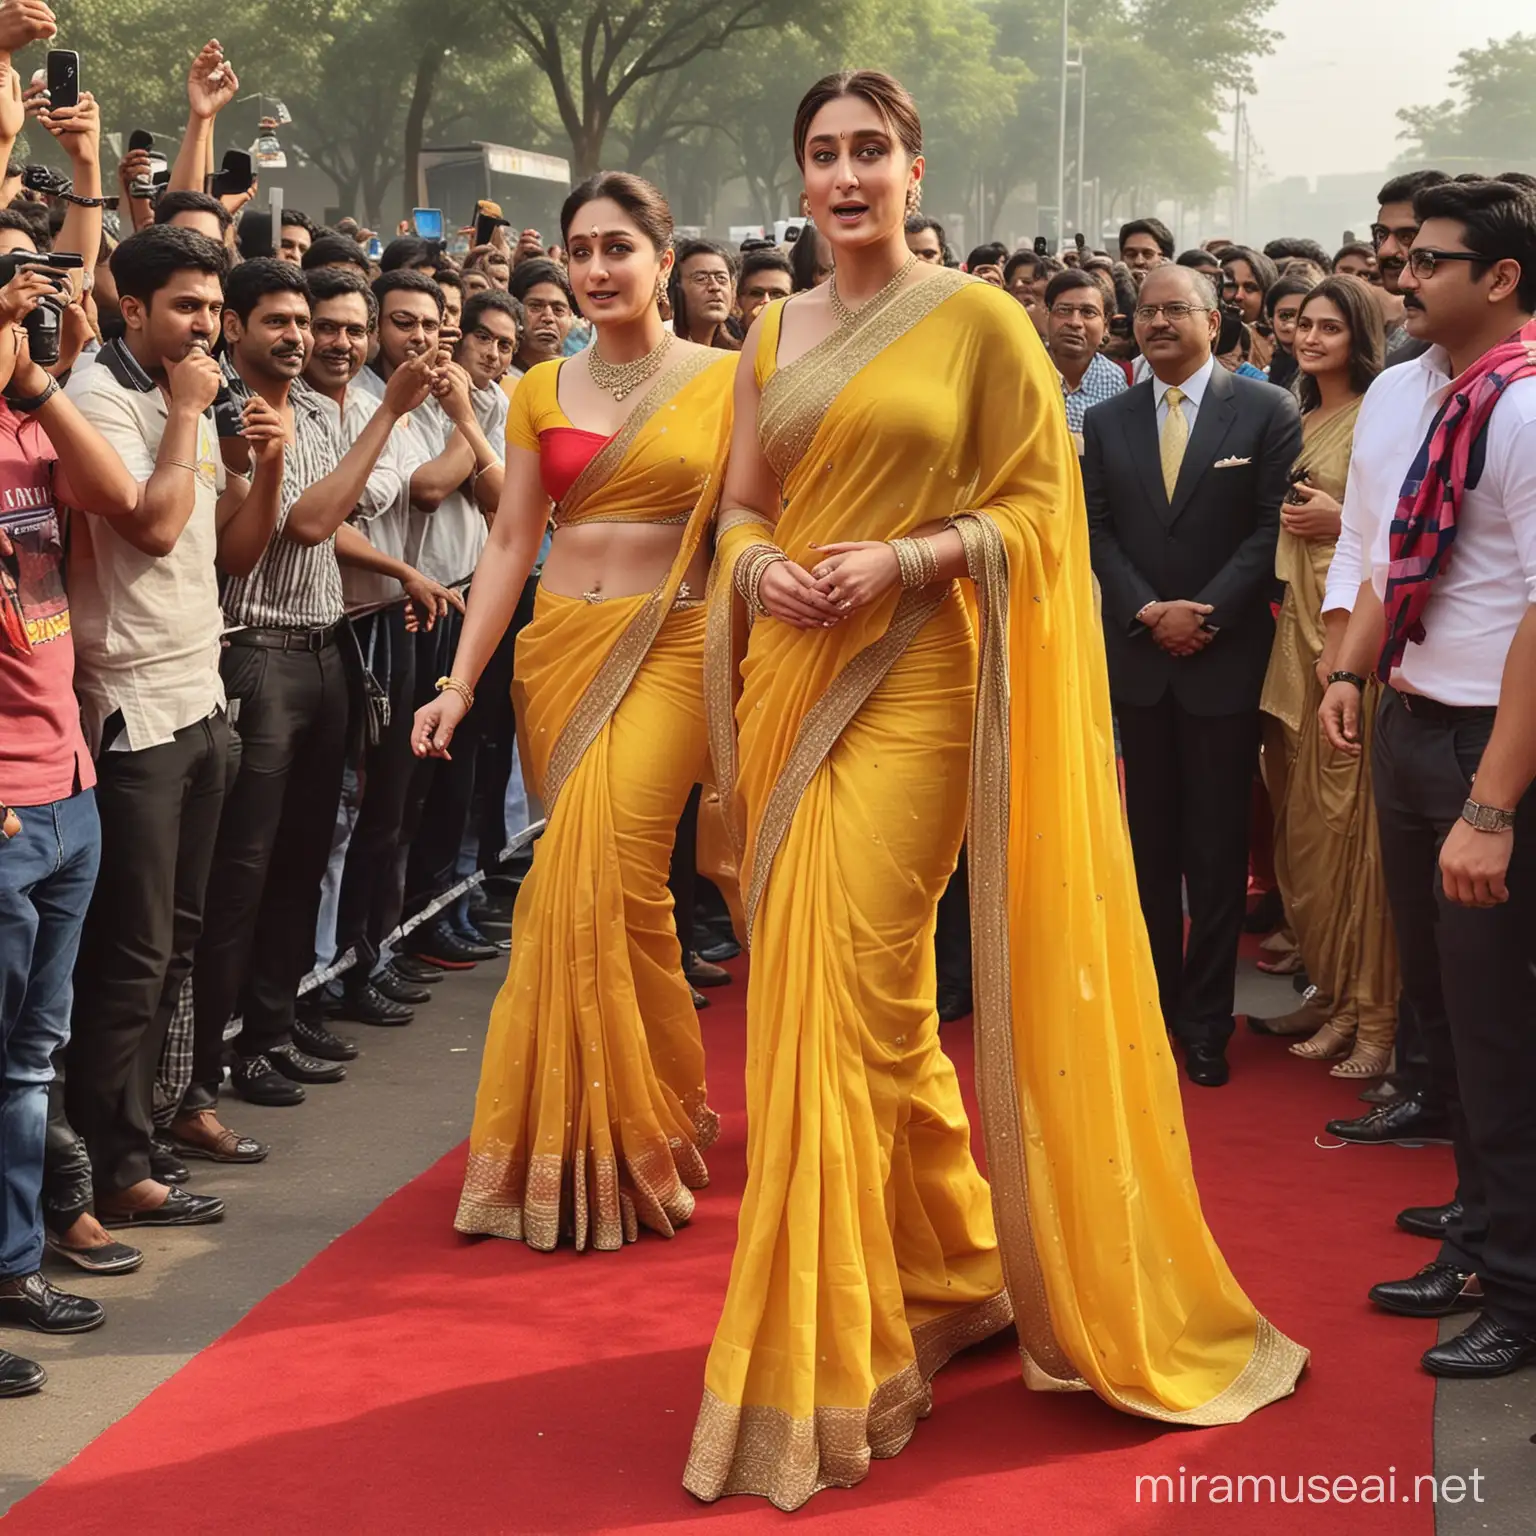 Bollywood Superstar Kareena Kapoor Glows in Yellow Saree Guarded by Captain America on Red Carpet